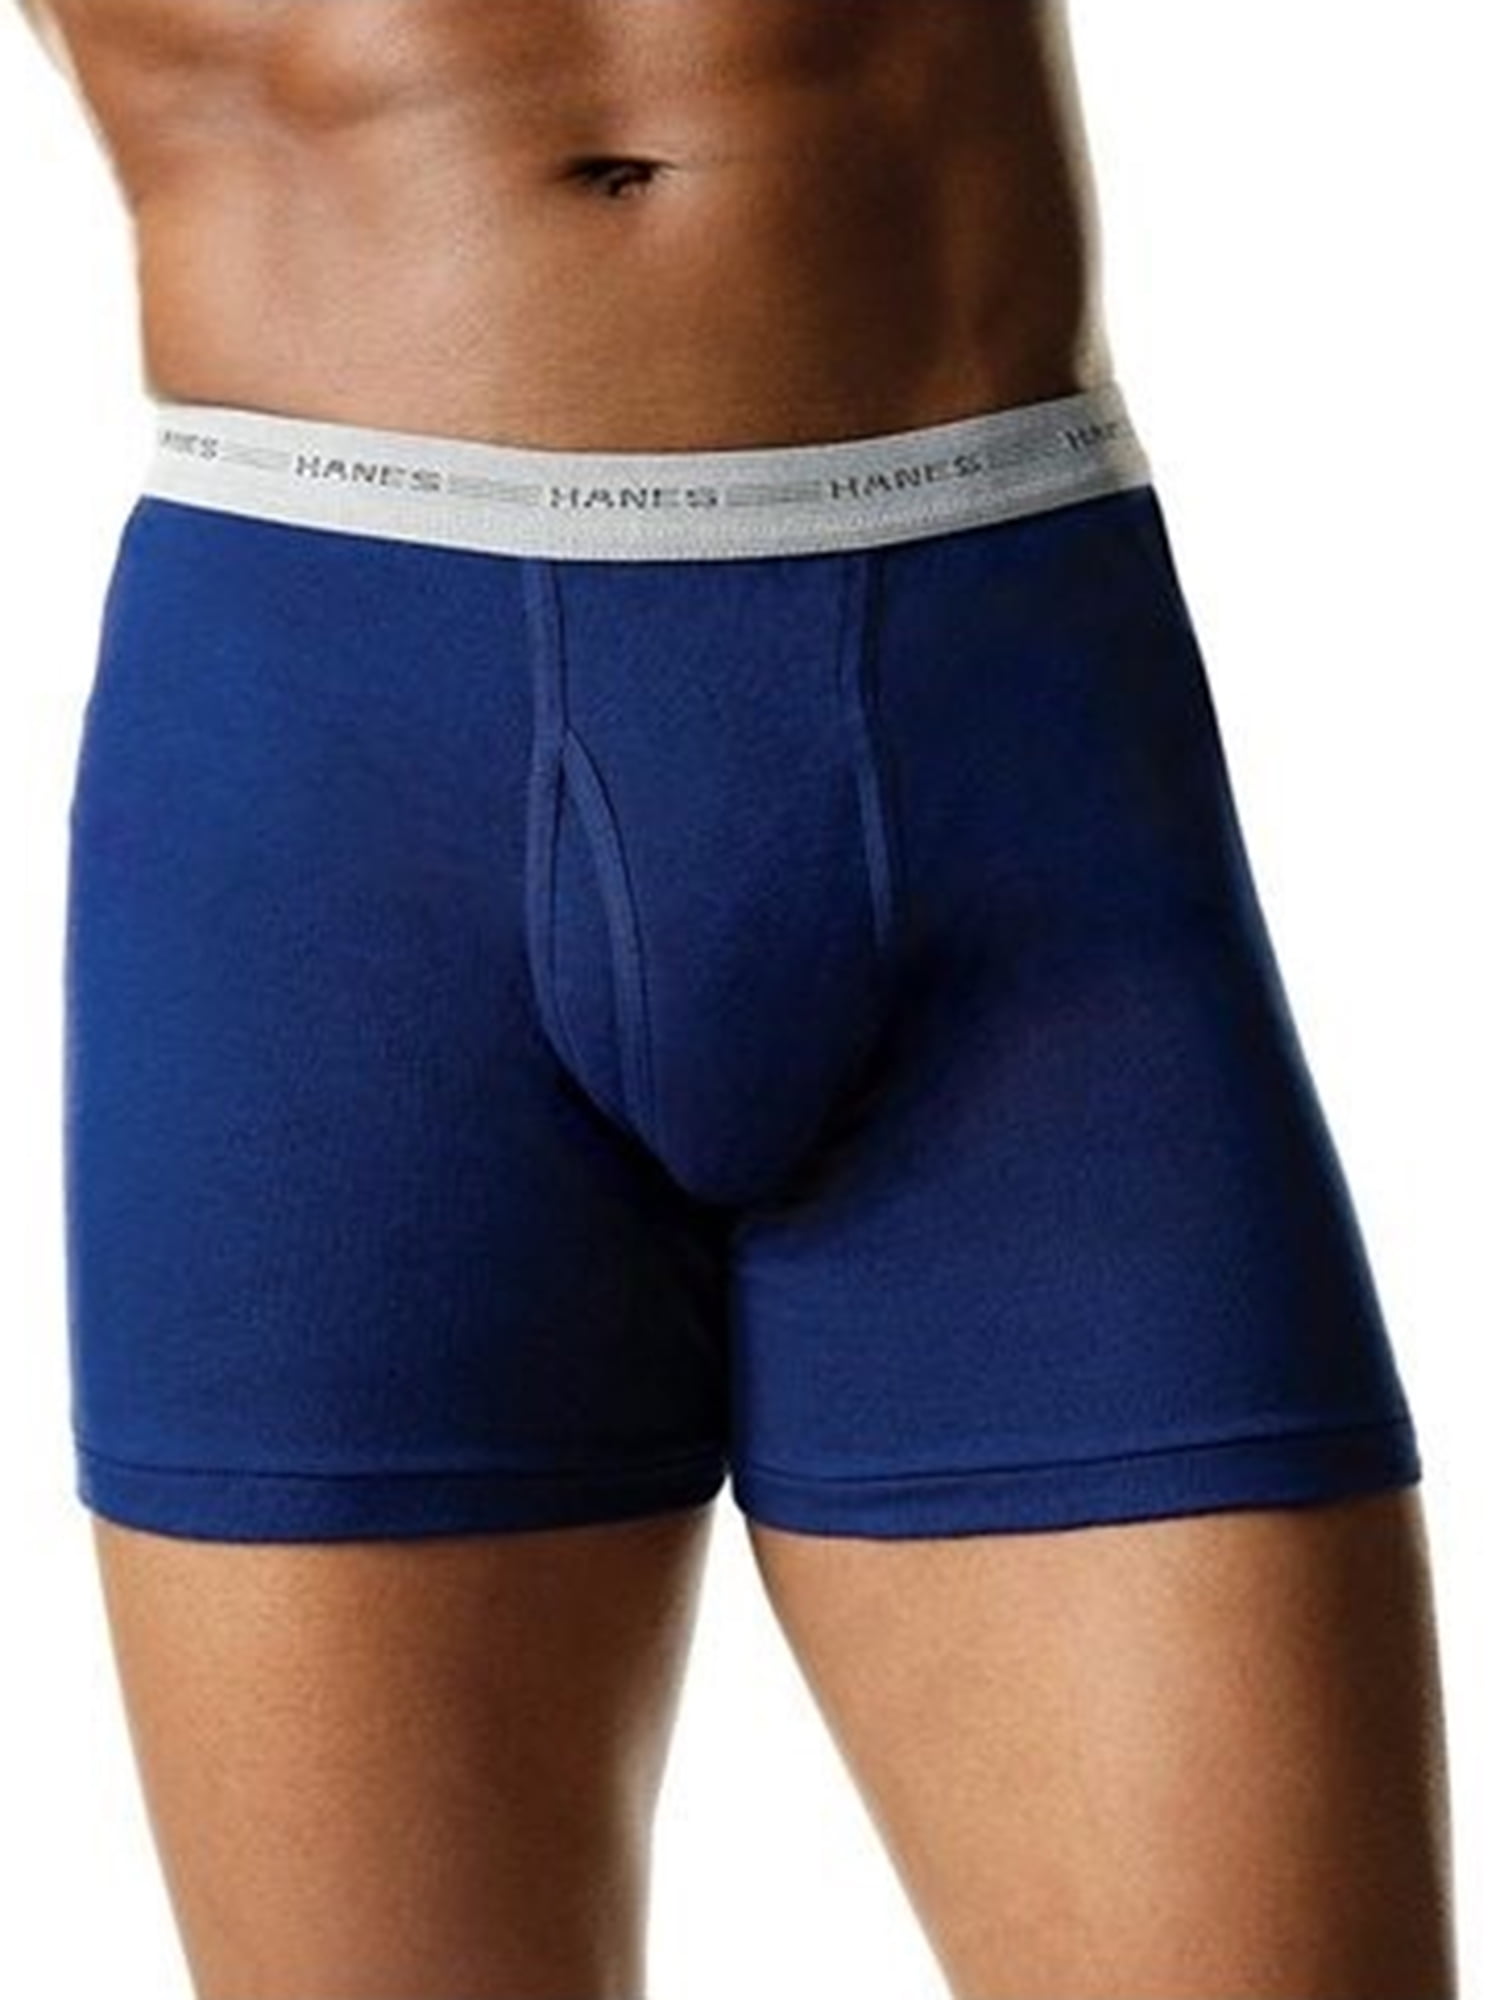 Hanes Mens Boxer Briefs Pack of 4